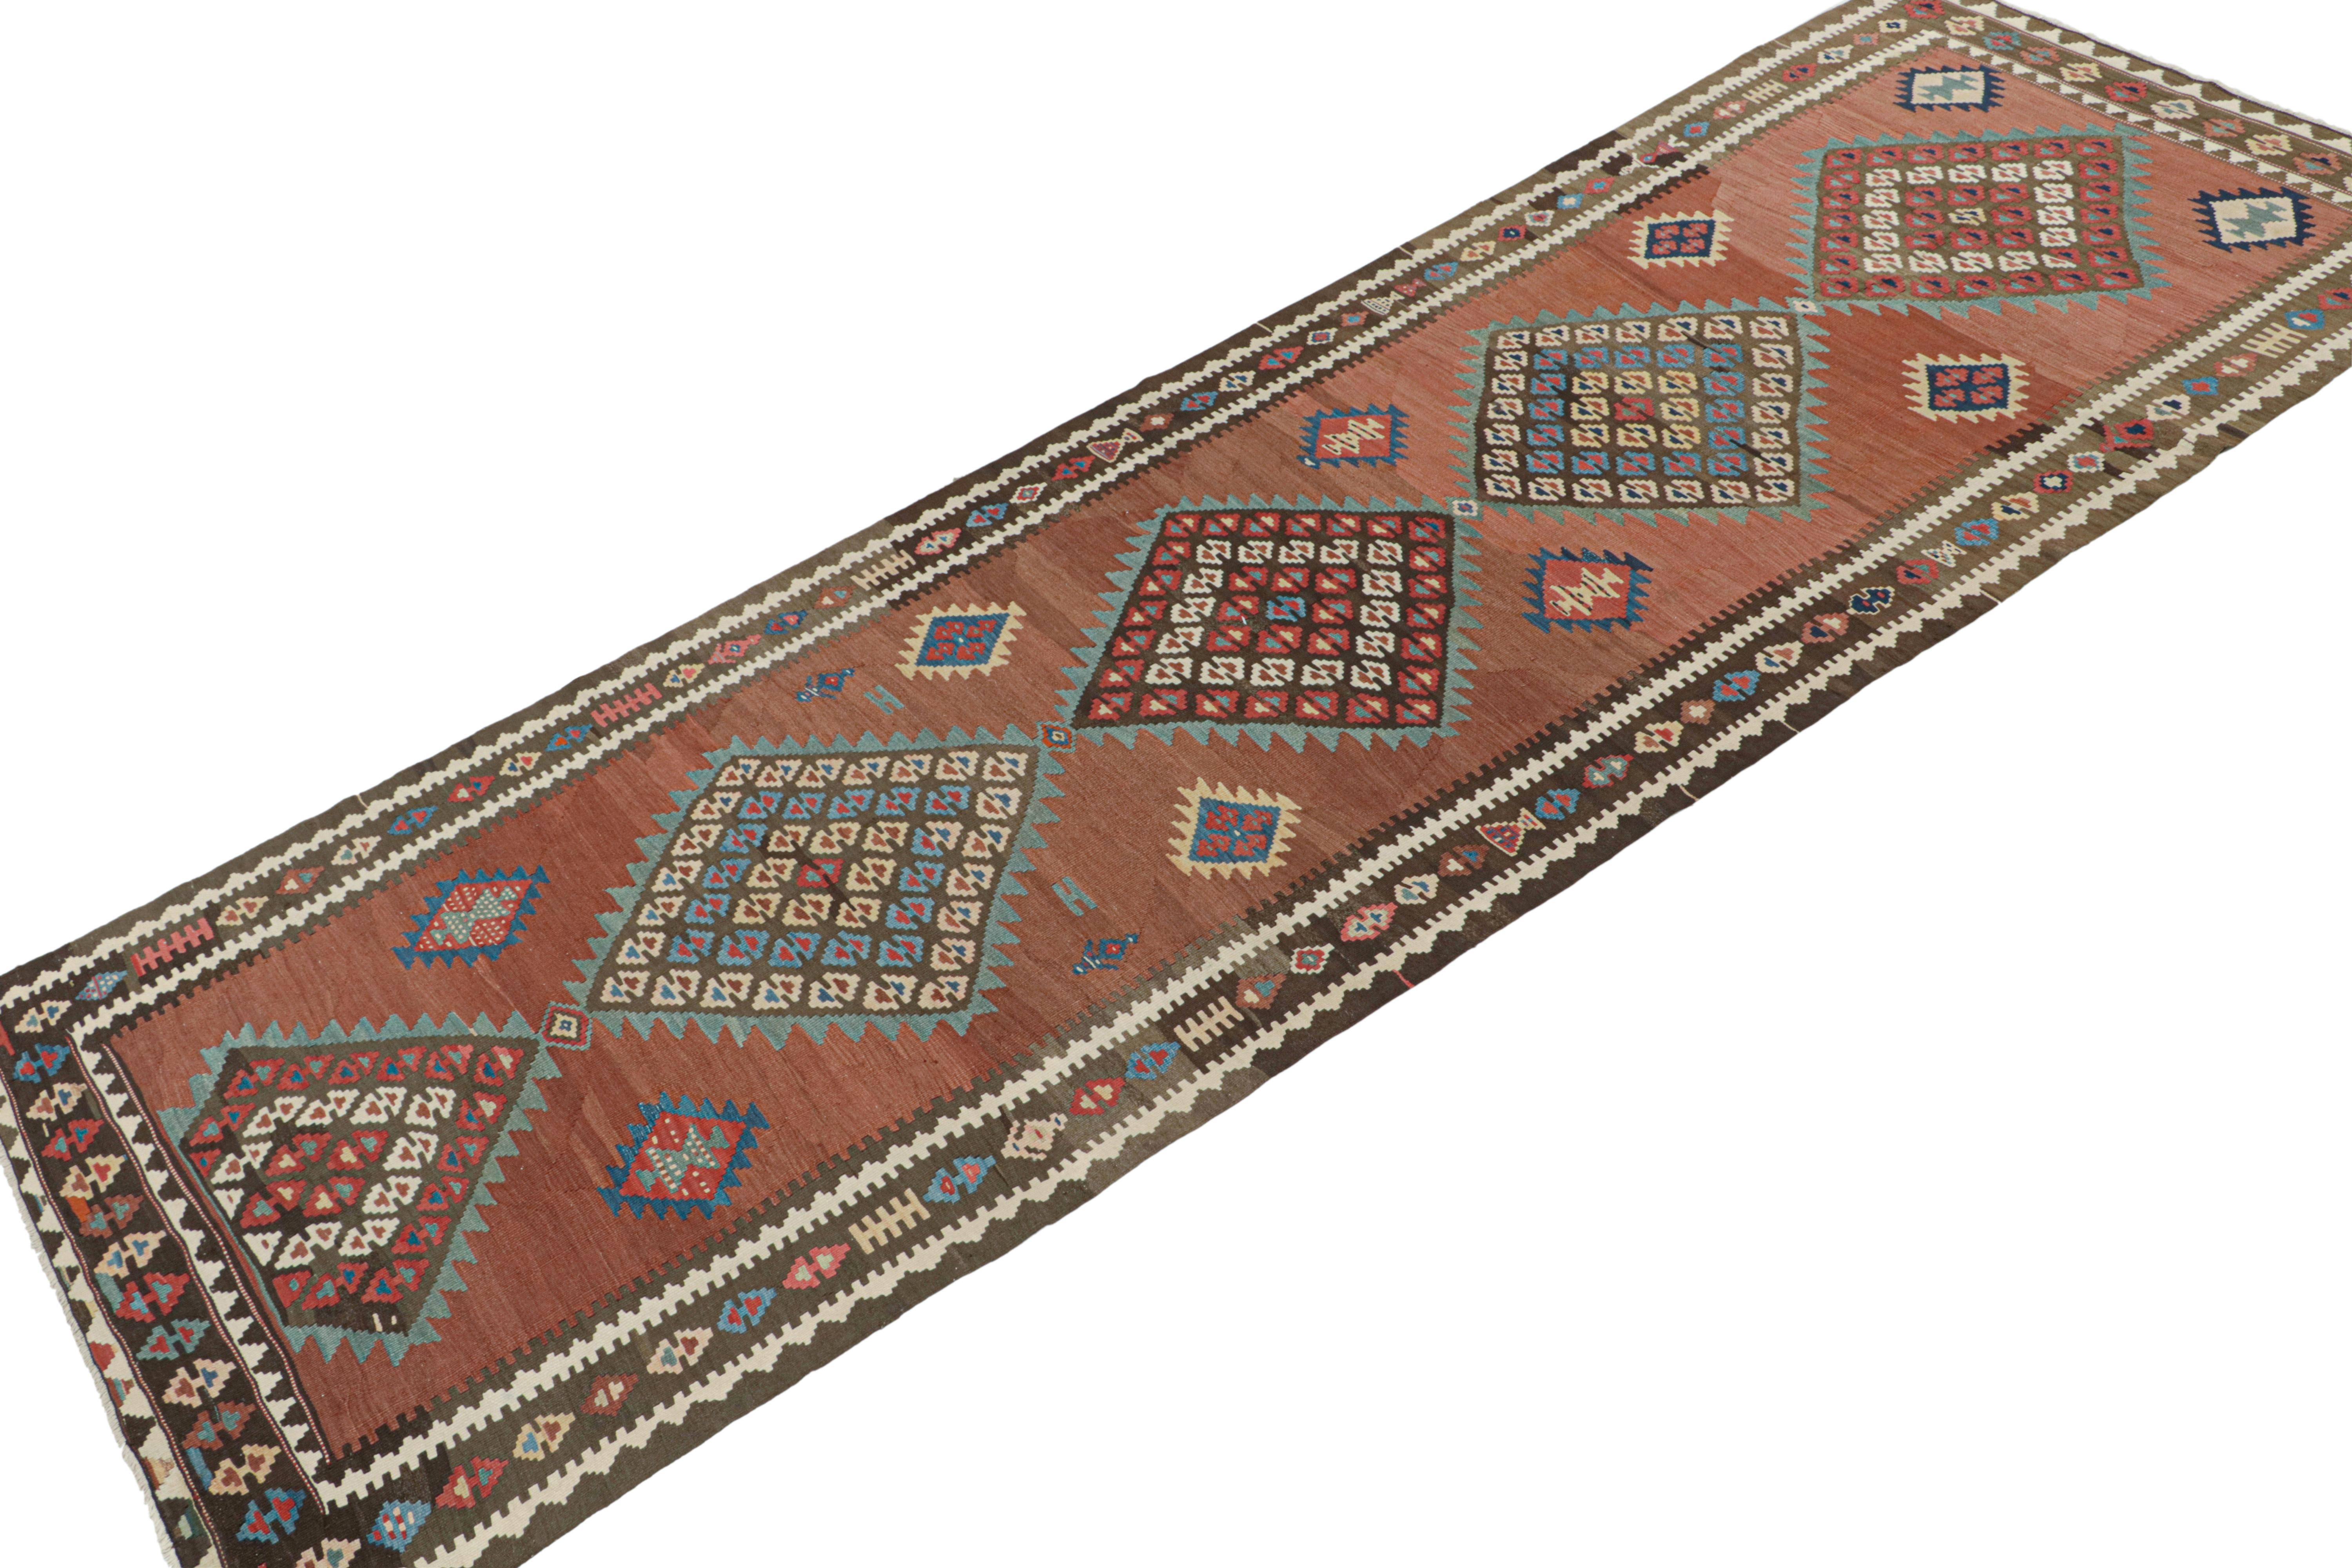 Tribal Vintage Persian Kilim in Brick Red with Medallion Patterns by Rug & Kilim For Sale